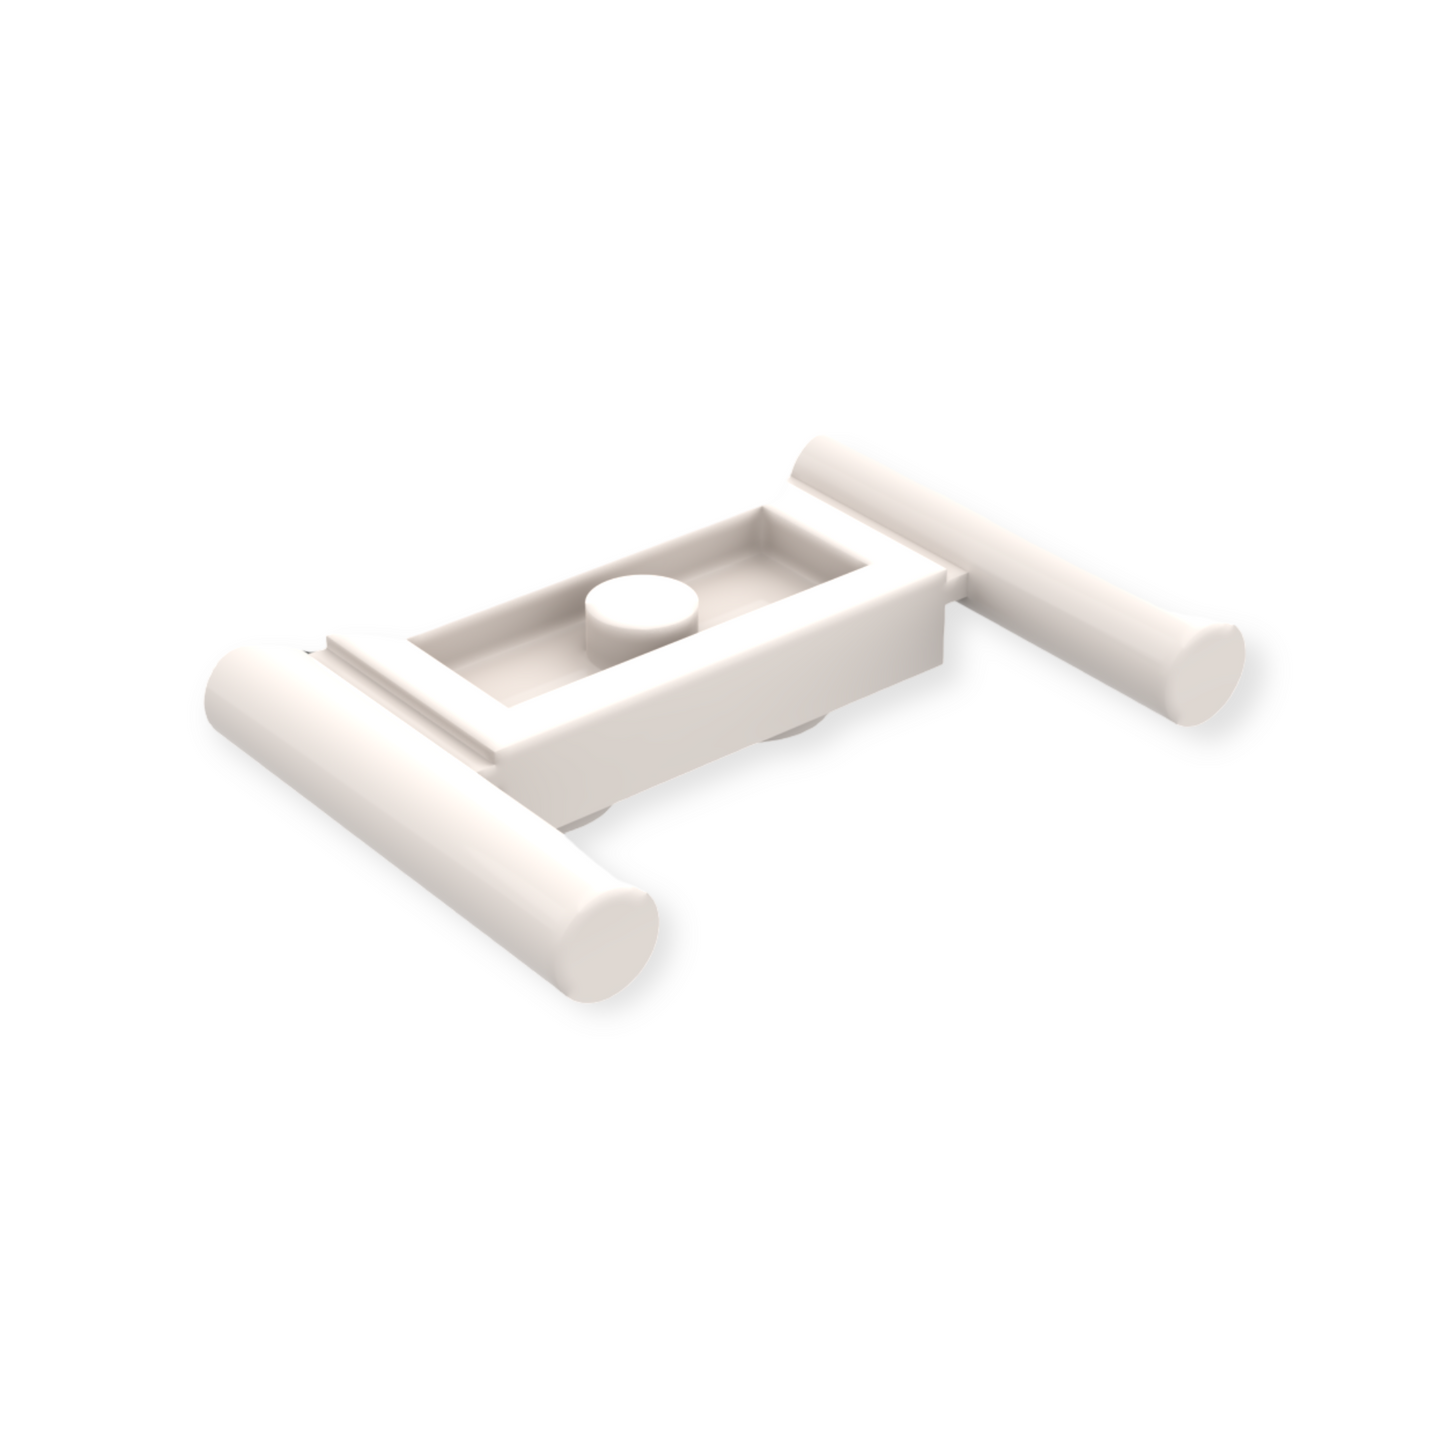 LEGO Plate Modified 1x2 with Bar Handles - Flat Ends Low Attachment - White